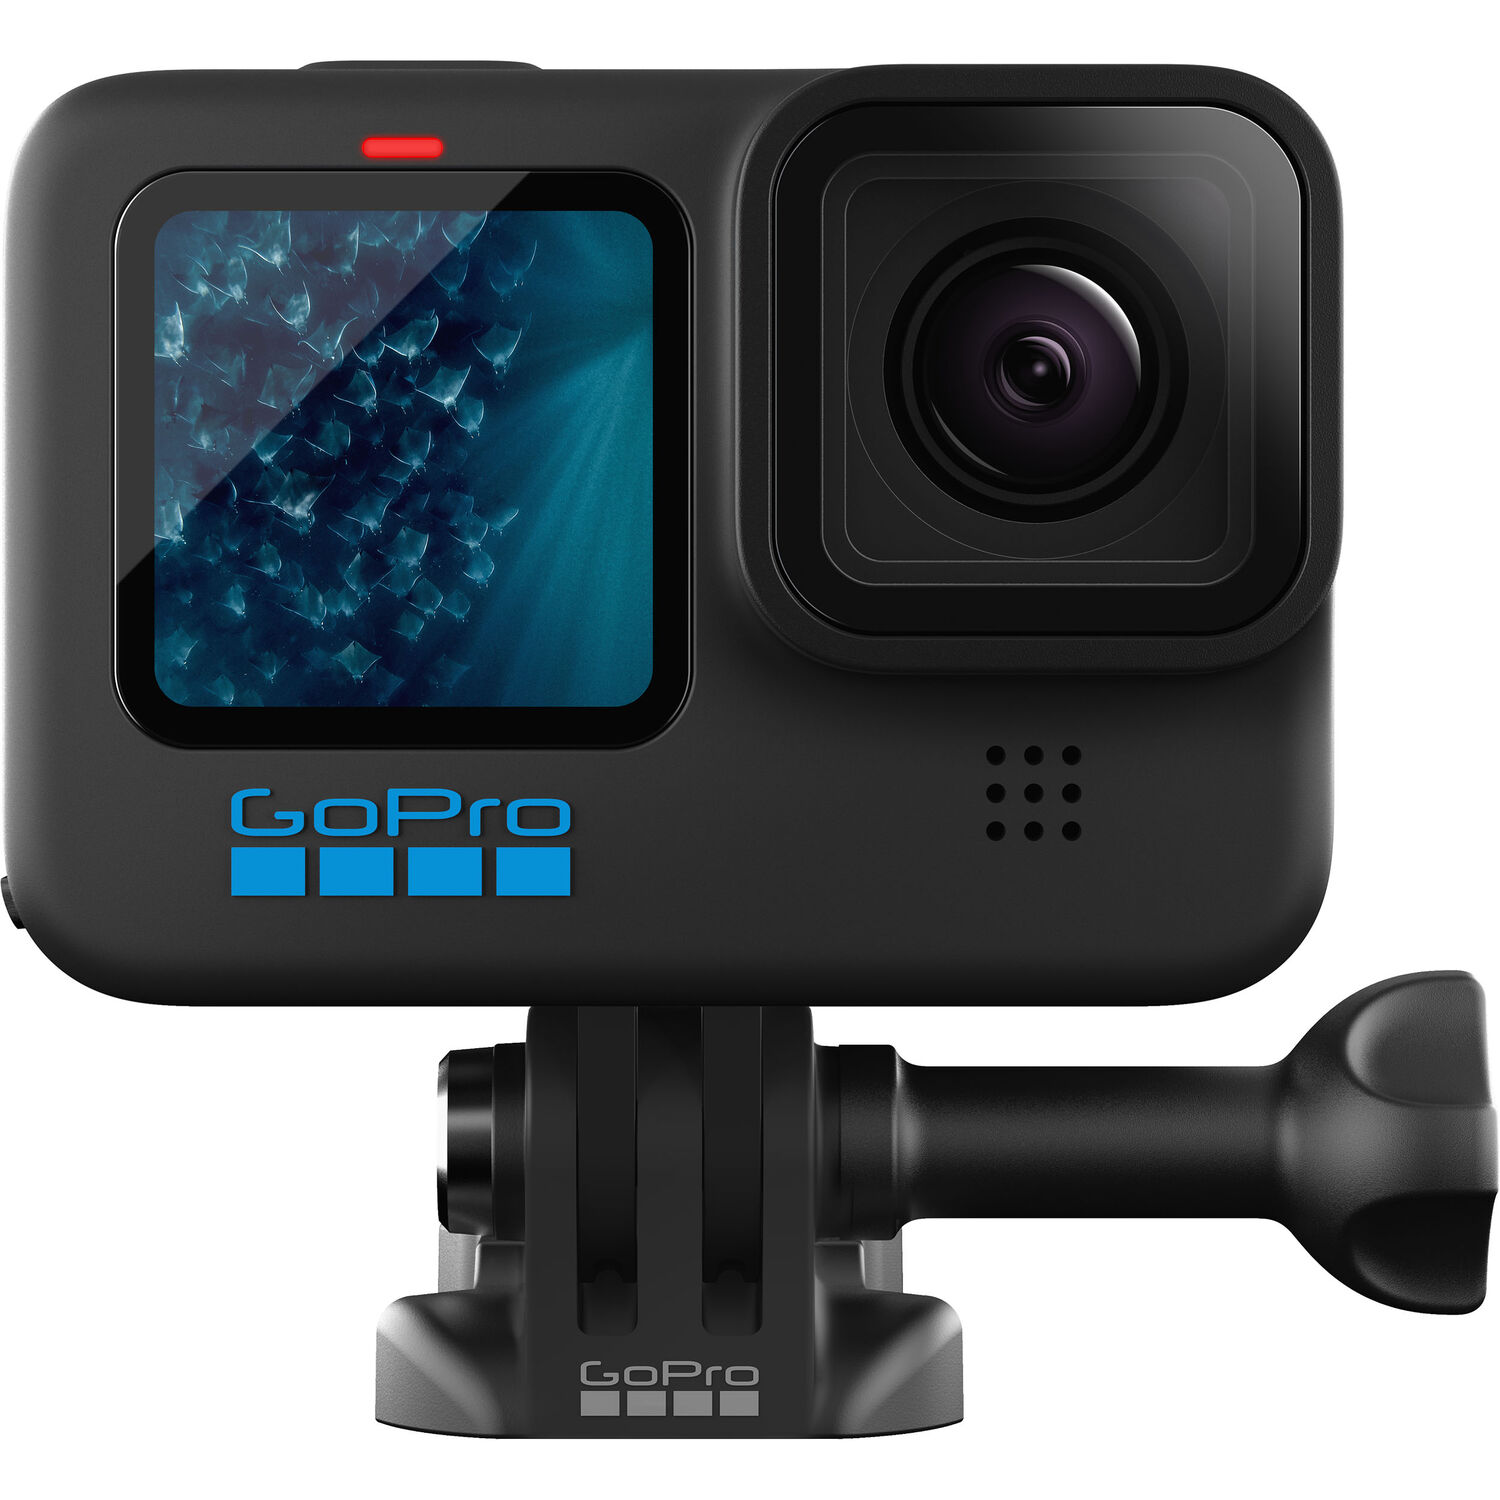 Does the GoPro Hero11 Black have RAW support?